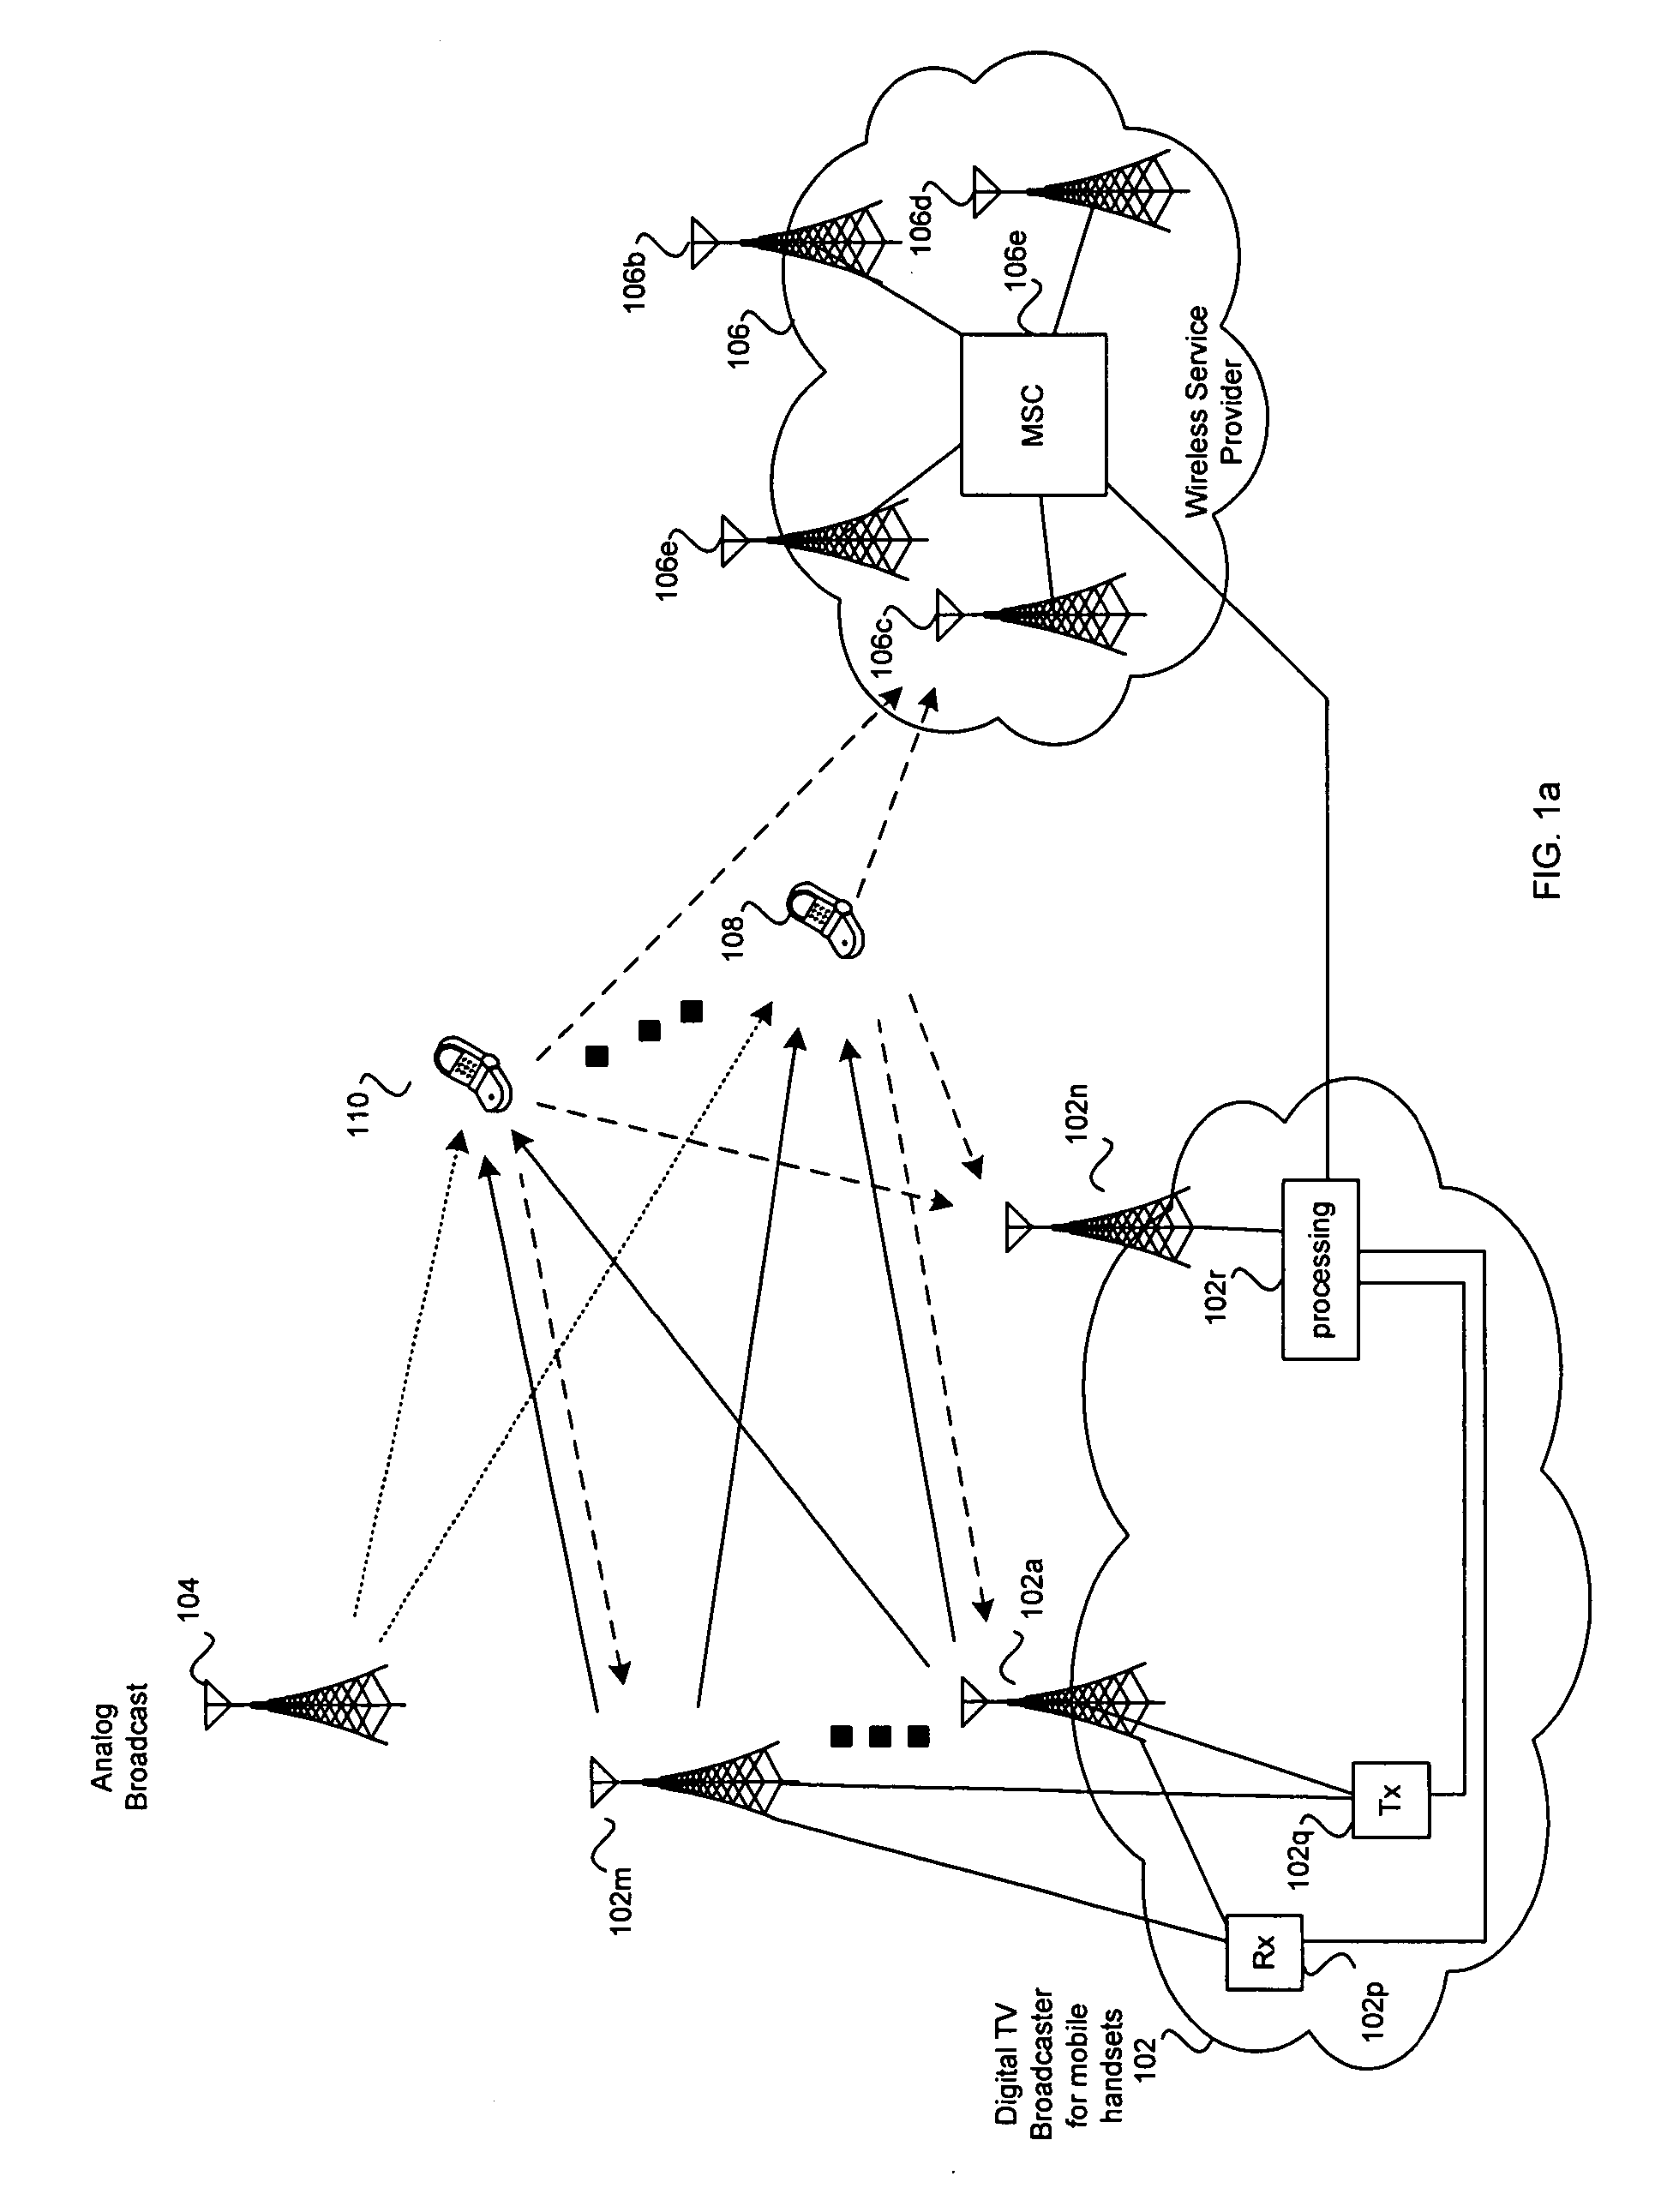 Method and system for mitigating interference from analog TV in a DVB-H system